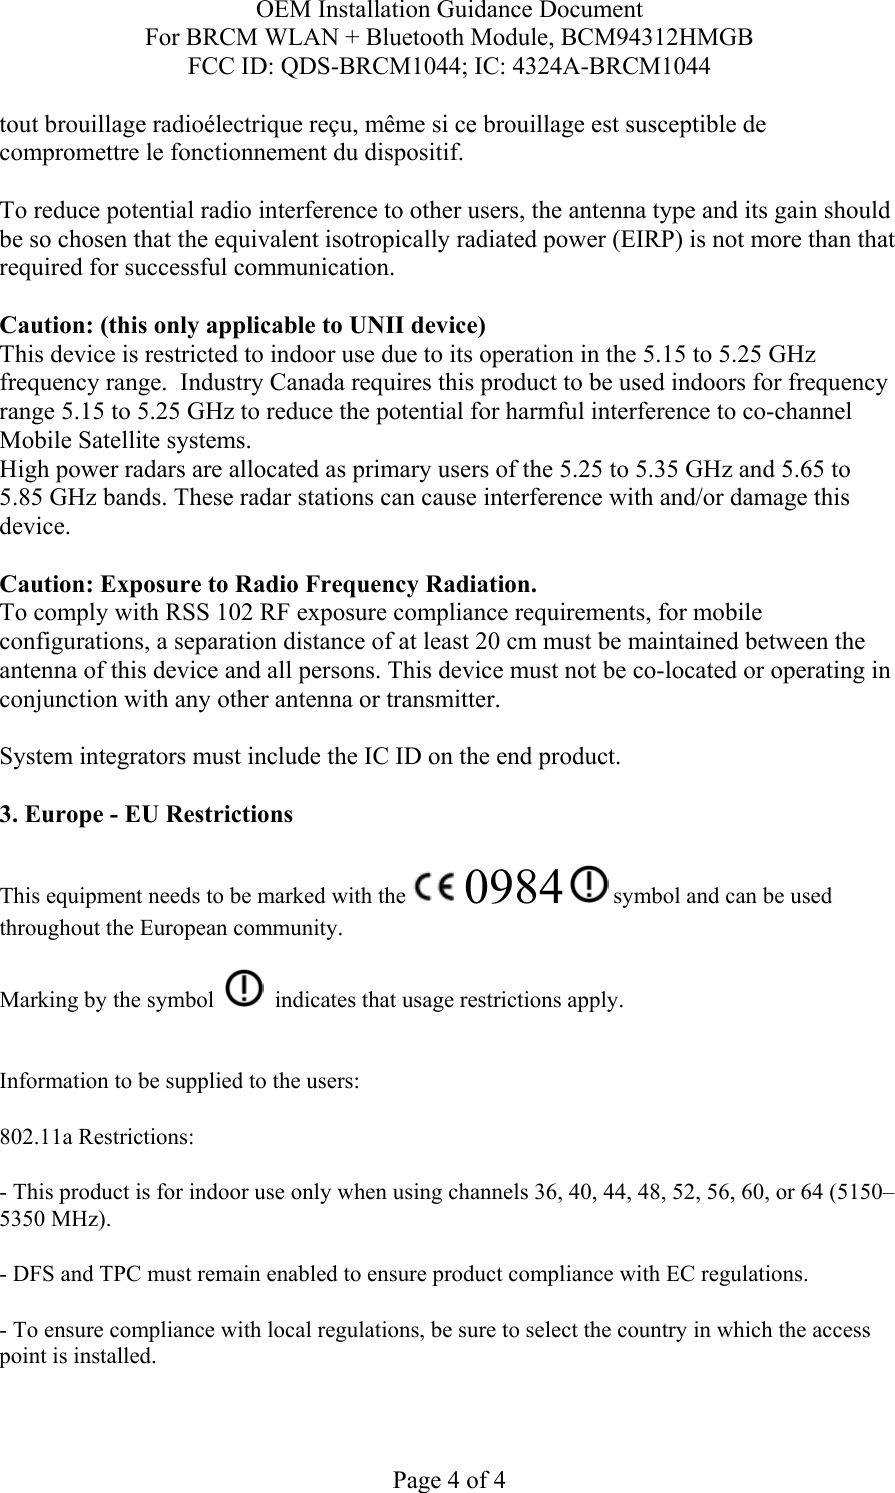 OEM Installation Guidance Document For BRCM WLAN + Bluetooth Module, BCM94312HMGB FCC ID: QDS-BRCM1044; IC: 4324A-BRCM1044  Page 4 of 4 tout brouillage radioélectrique reçu, même si ce brouillage est susceptible de compromettre le fonctionnement du dispositif.  To reduce potential radio interference to other users, the antenna type and its gain should be so chosen that the equivalent isotropically radiated power (EIRP) is not more than that required for successful communication.  Caution: (this only applicable to UNII device) This device is restricted to indoor use due to its operation in the 5.15 to 5.25 GHz frequency range.  Industry Canada requires this product to be used indoors for frequency range 5.15 to 5.25 GHz to reduce the potential for harmful interference to co-channel Mobile Satellite systems. High power radars are allocated as primary users of the 5.25 to 5.35 GHz and 5.65 to 5.85 GHz bands. These radar stations can cause interference with and/or damage this device.  Caution: Exposure to Radio Frequency Radiation. To comply with RSS 102 RF exposure compliance requirements, for mobile configurations, a separation distance of at least 20 cm must be maintained between the antenna of this device and all persons. This device must not be co-located or operating in conjunction with any other antenna or transmitter.  System integrators must include the IC ID on the end product.   3. Europe - EU Restrictions This equipment needs to be marked with the   0984  symbol and can be used throughout the European community.  Marking by the symbol     indicates that usage restrictions apply.  Information to be supplied to the users: 802.11a Restrictions: - This product is for indoor use only when using channels 36, 40, 44, 48, 52, 56, 60, or 64 (5150–5350 MHz).       - DFS and TPC must remain enabled to ensure product compliance with EC regulations.      - To ensure compliance with local regulations, be sure to select the country in which the access point is installed. 